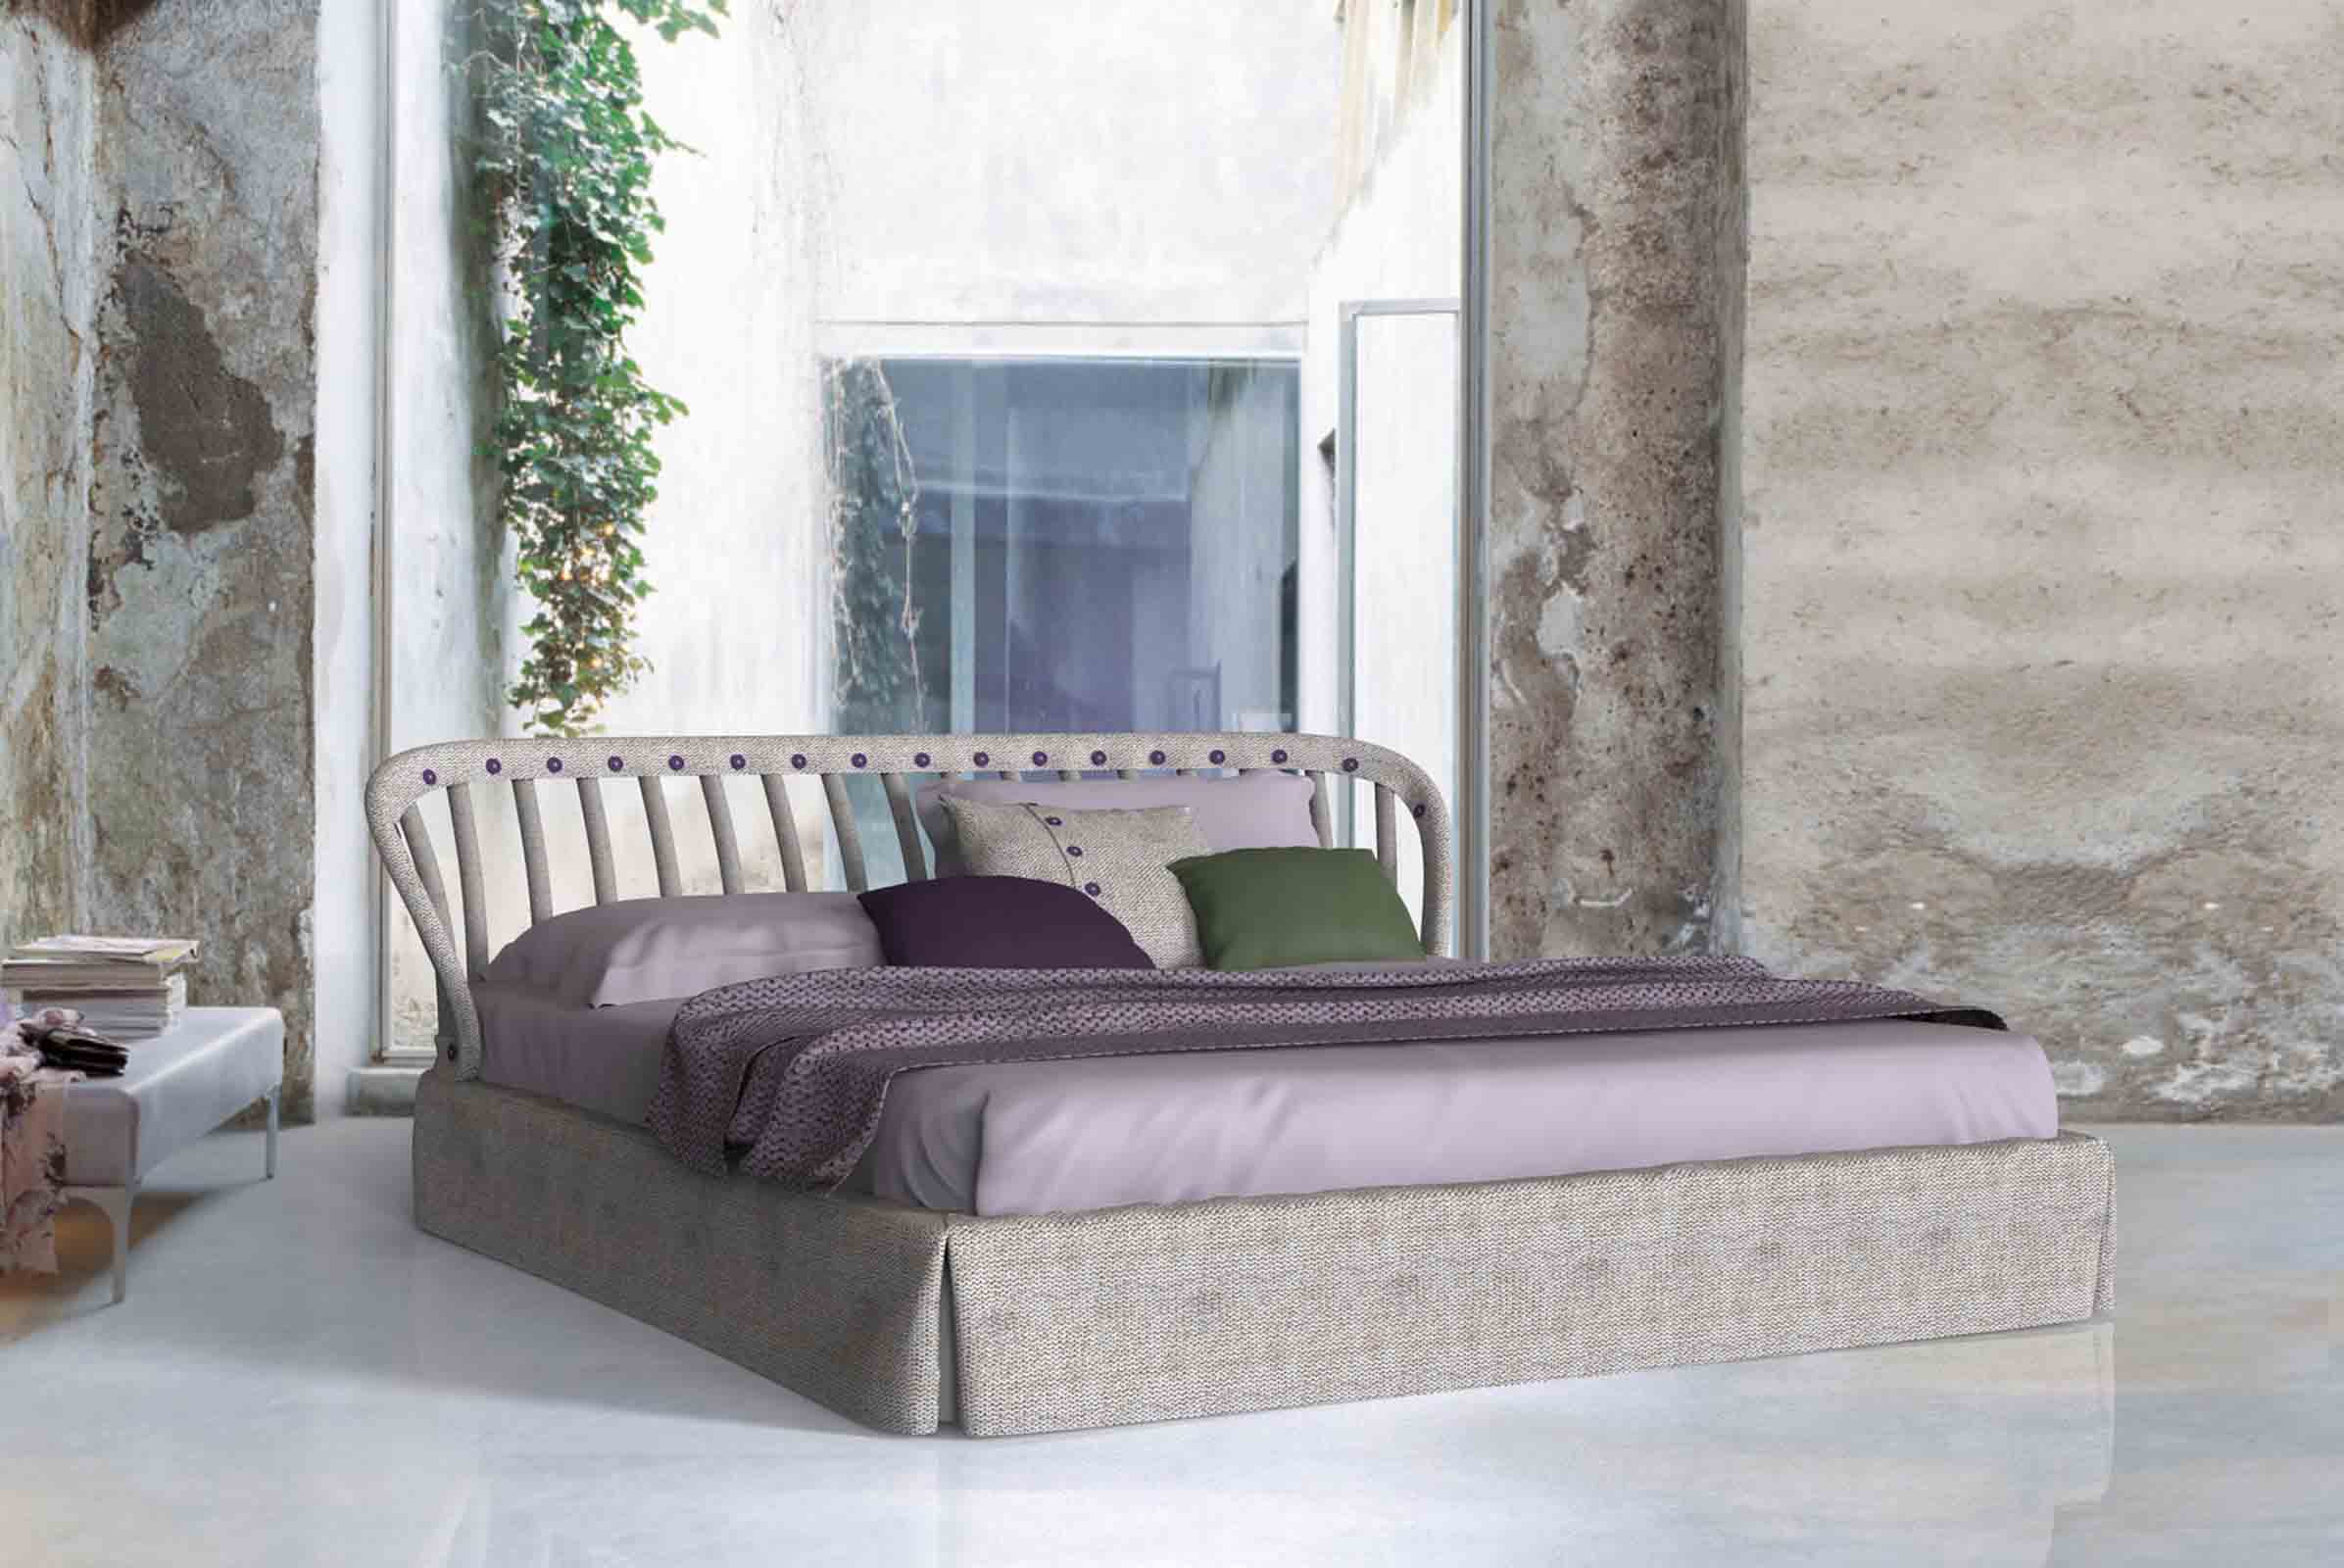 The ‘Open Air’ bed designed by  Meneghello Paolelli for Twils